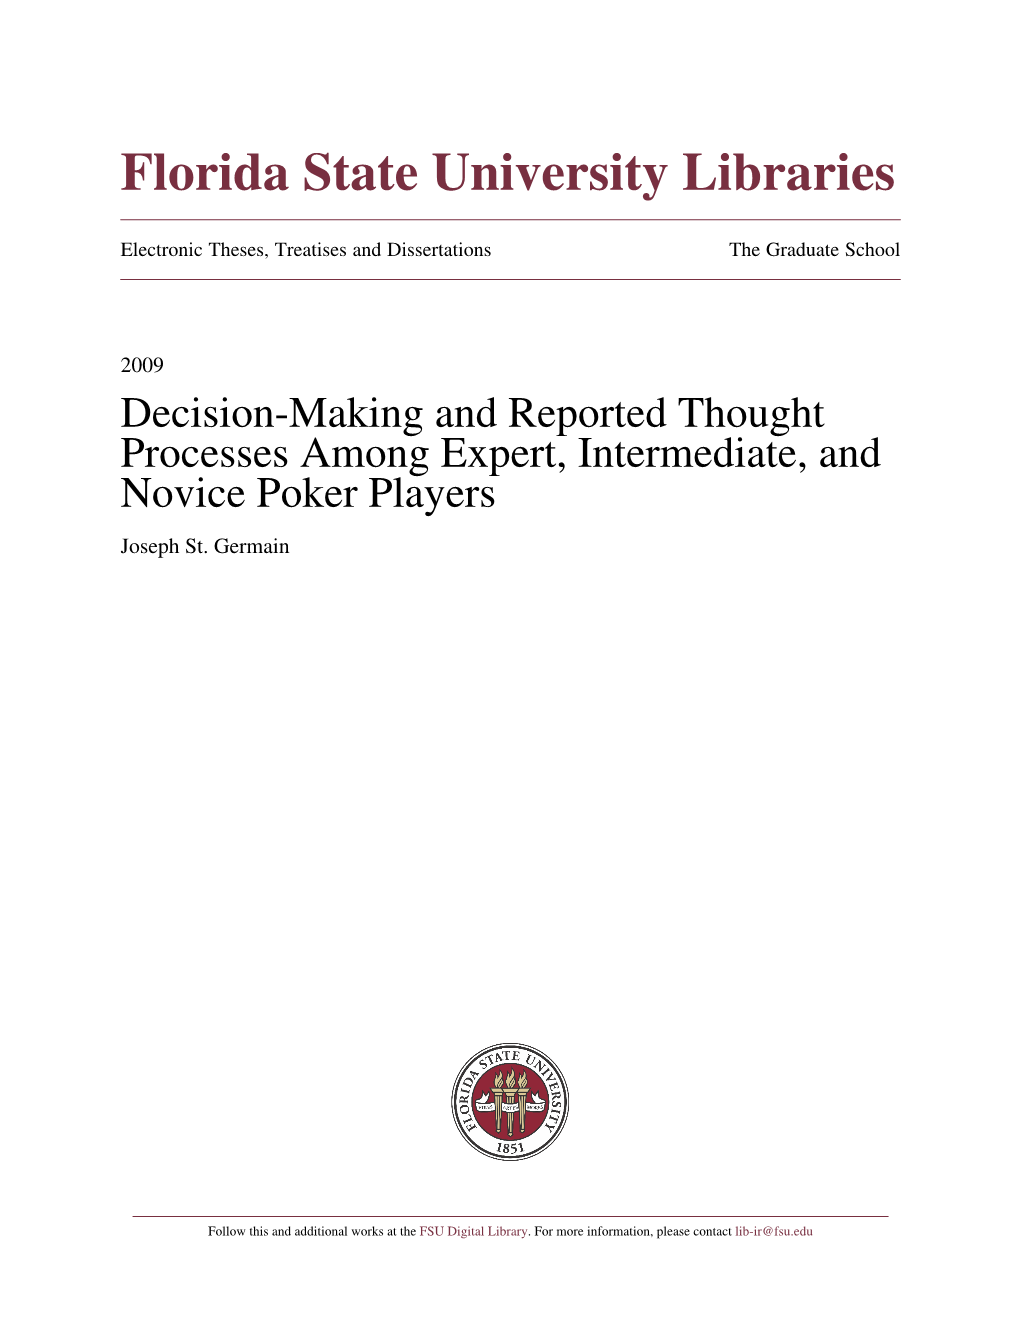 Decision-Making and Reported Thought Processes Among Expert, Intermediate, and Novice Poker Players Joseph St